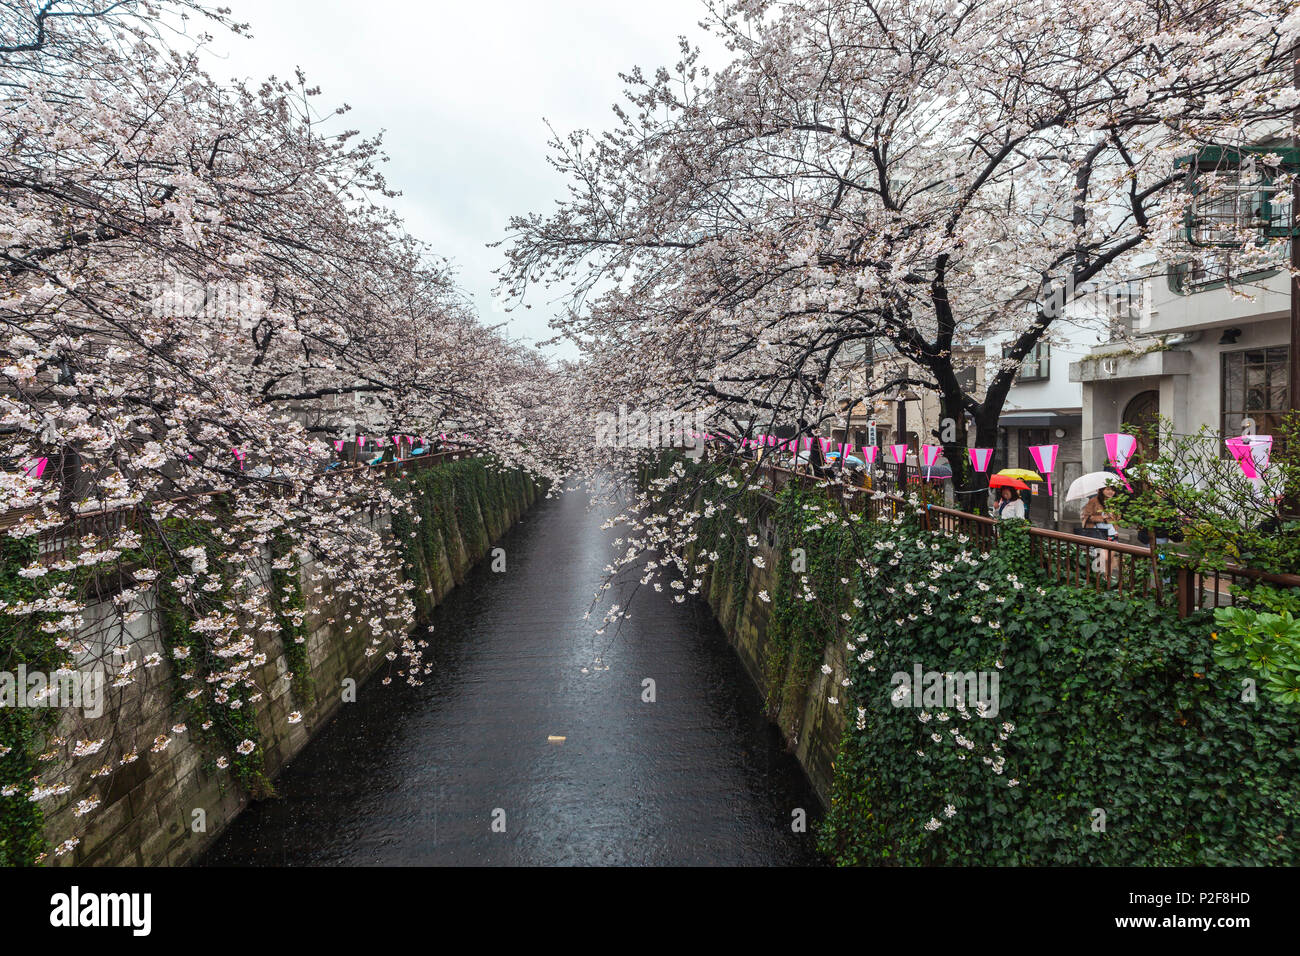 Road with Cherry Trees in full blossom at Meguro River, Meguro, Tokyo, Japan Stock Photo